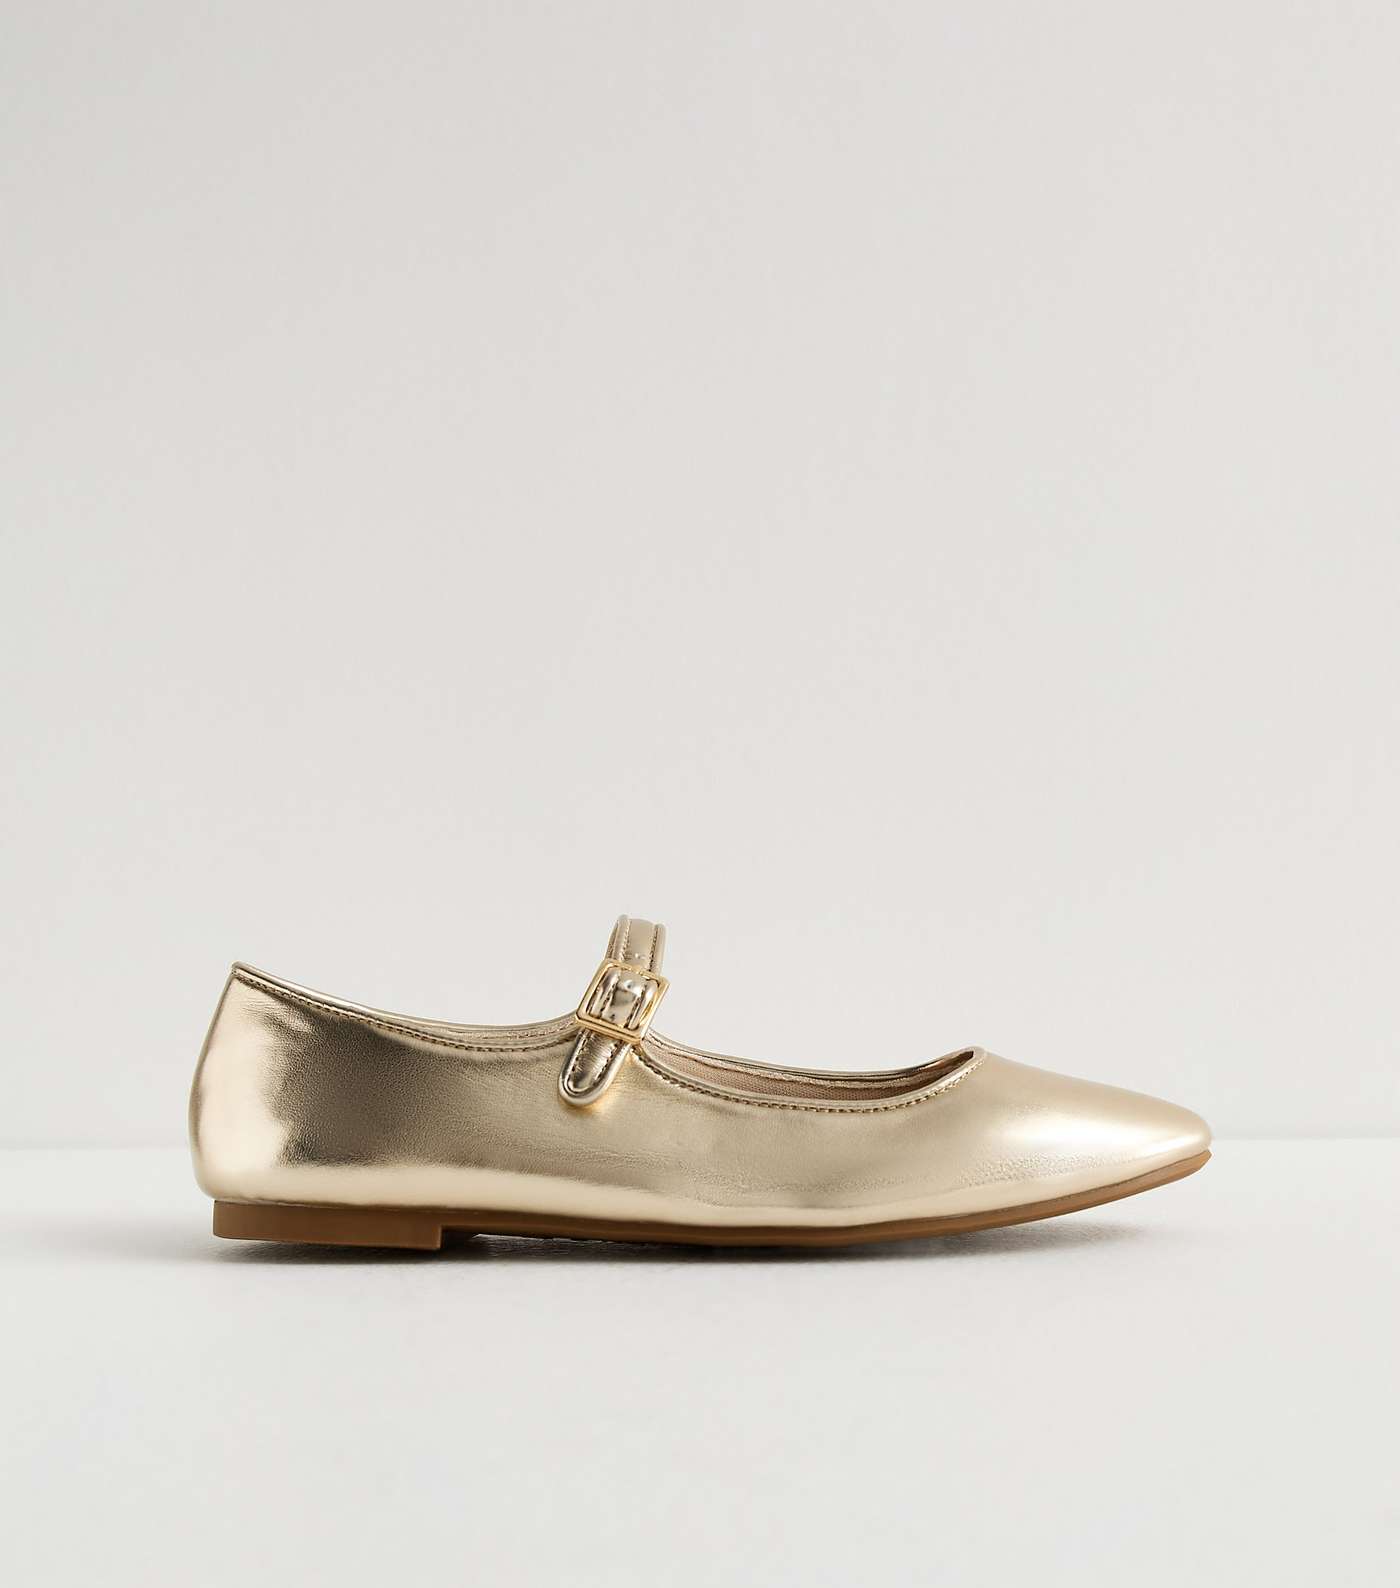 Gold Strappy Mary Jane Ballerina Pumps Image 5